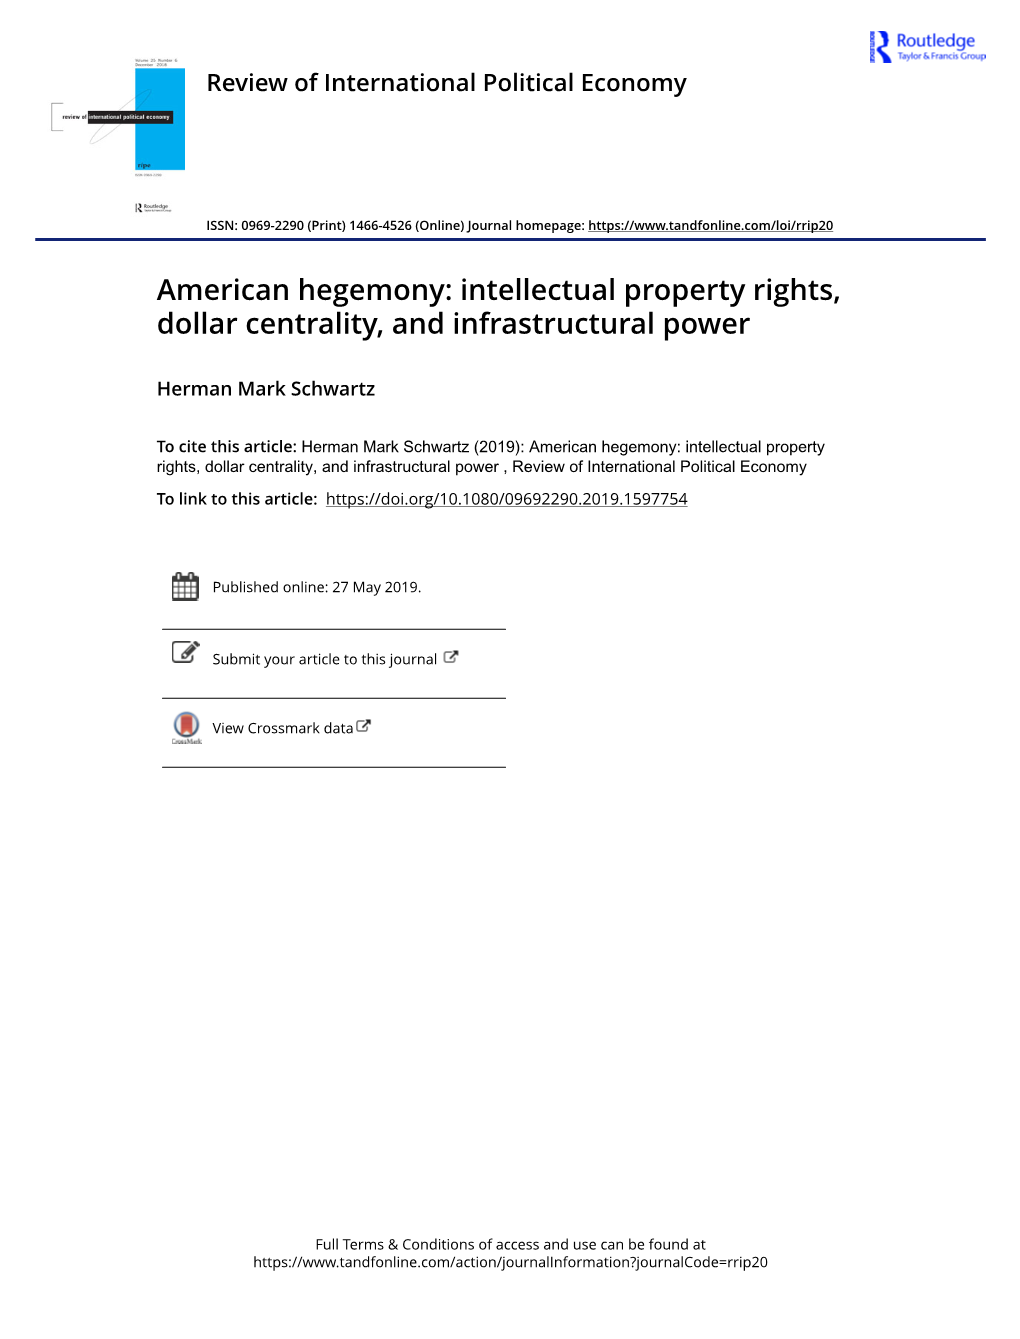 American Hegemony: Intellectual Property Rights, Dollar Centrality, and Infrastructural Power